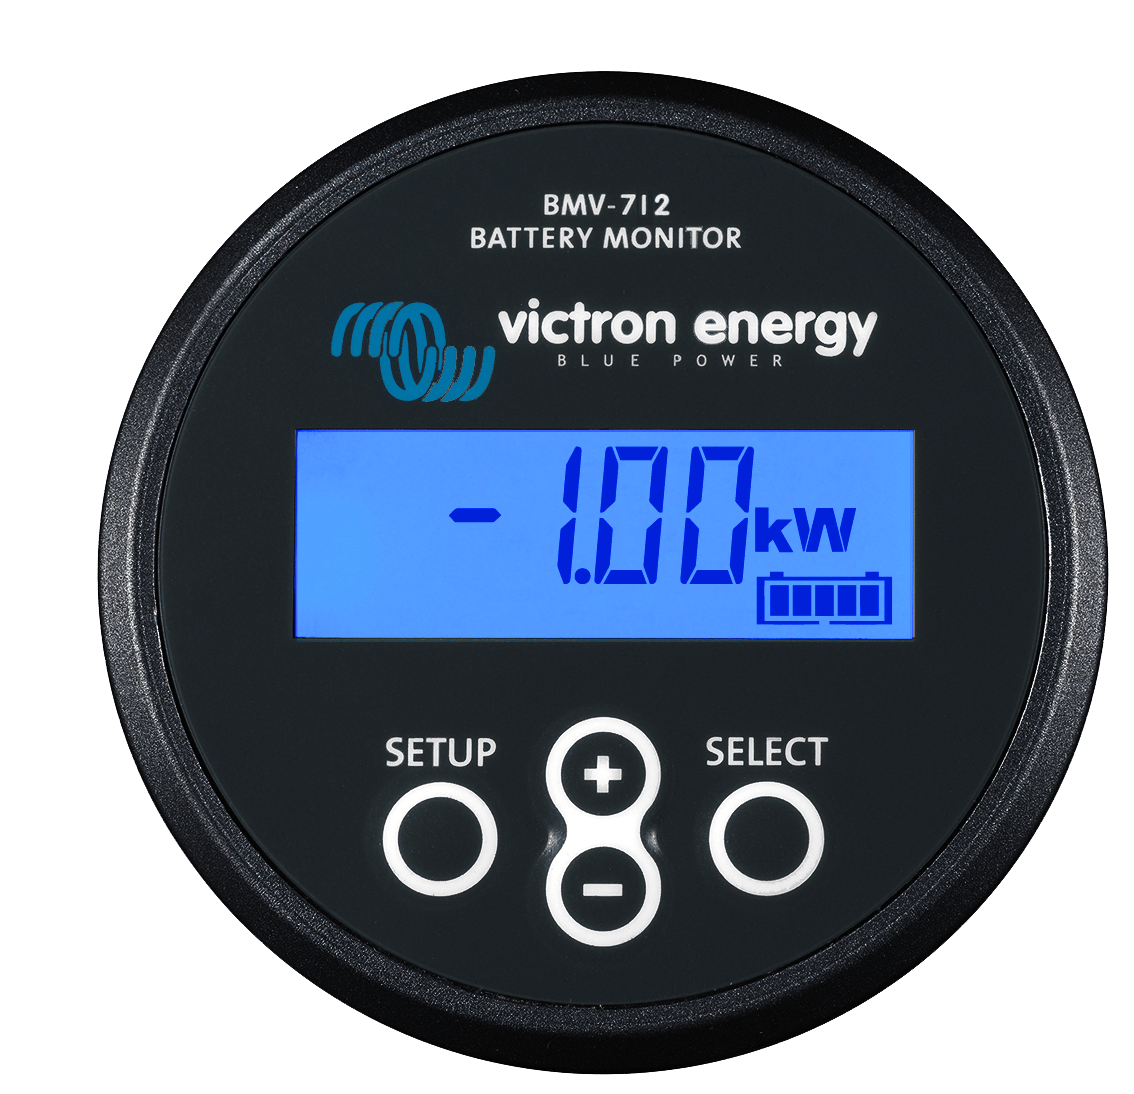 What's the voltage limit of the Victron BMV 712?